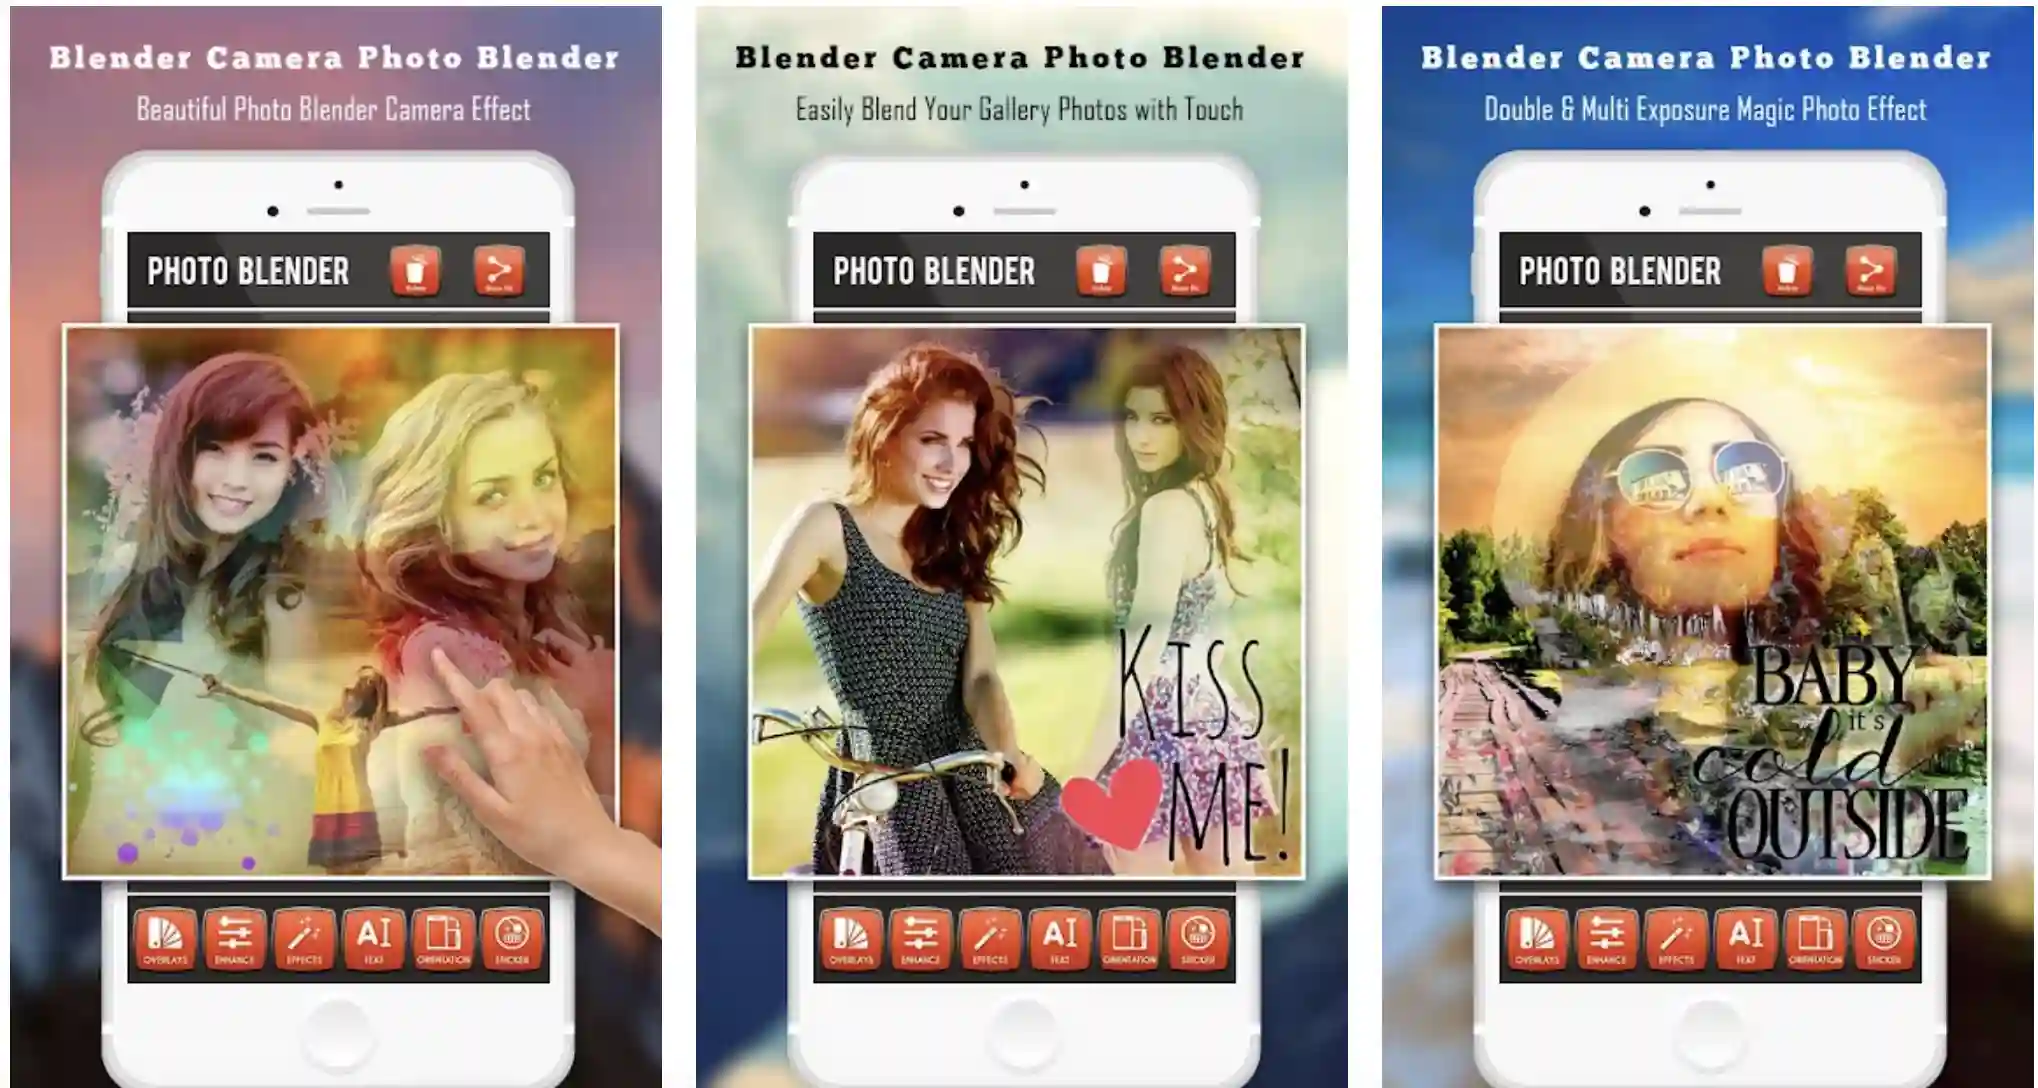 11 Best Blending Photo Apps To Blend Photos in Seconds